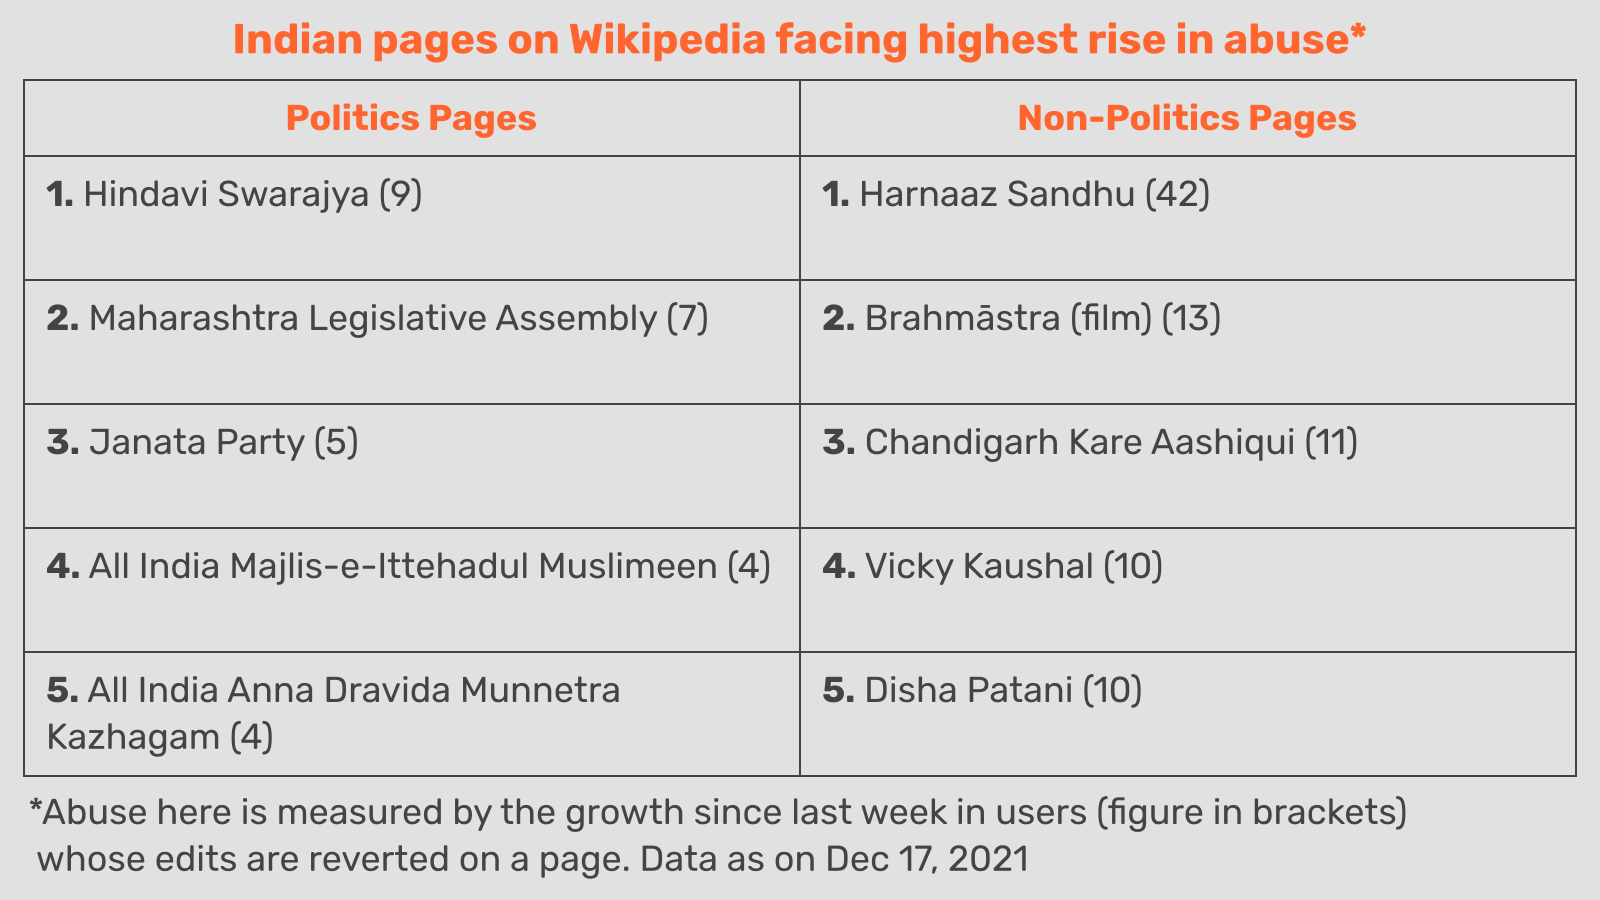 The Indian pages on Wikipedia facing biggest increase in abuse